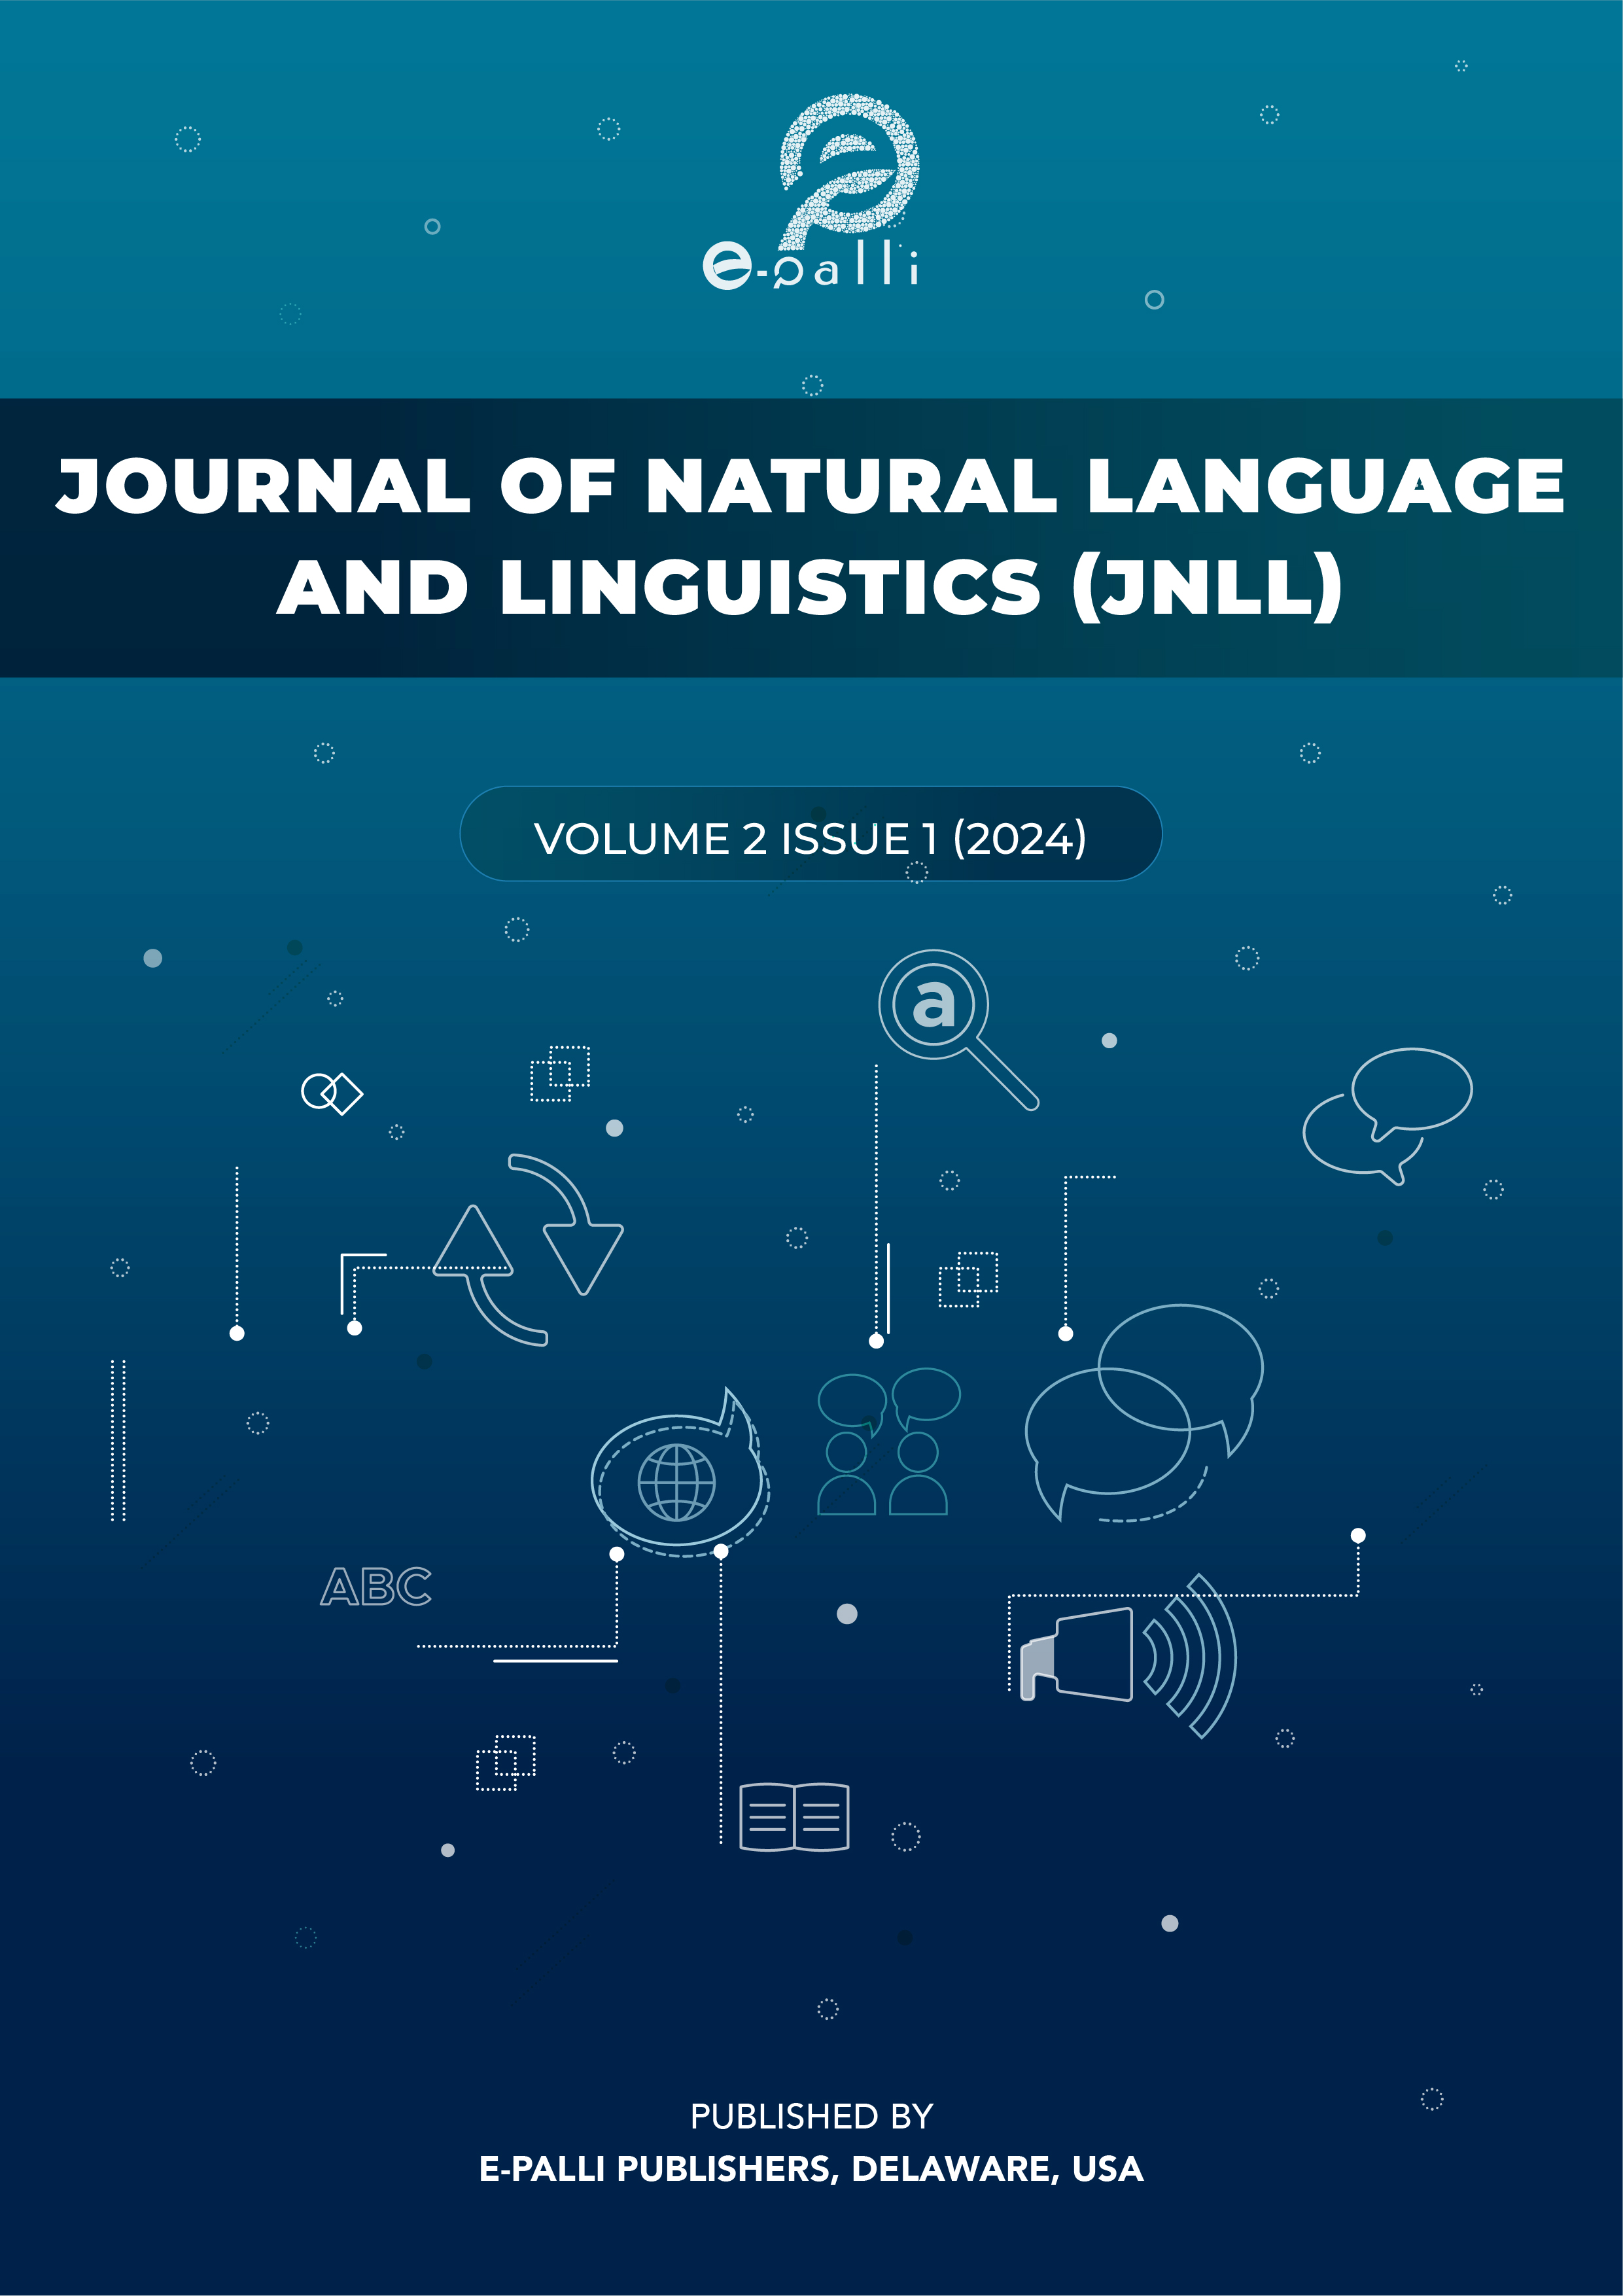                     View Vol. 2 No. 1 (2024): Journal of Natural Language and Linguistics
                